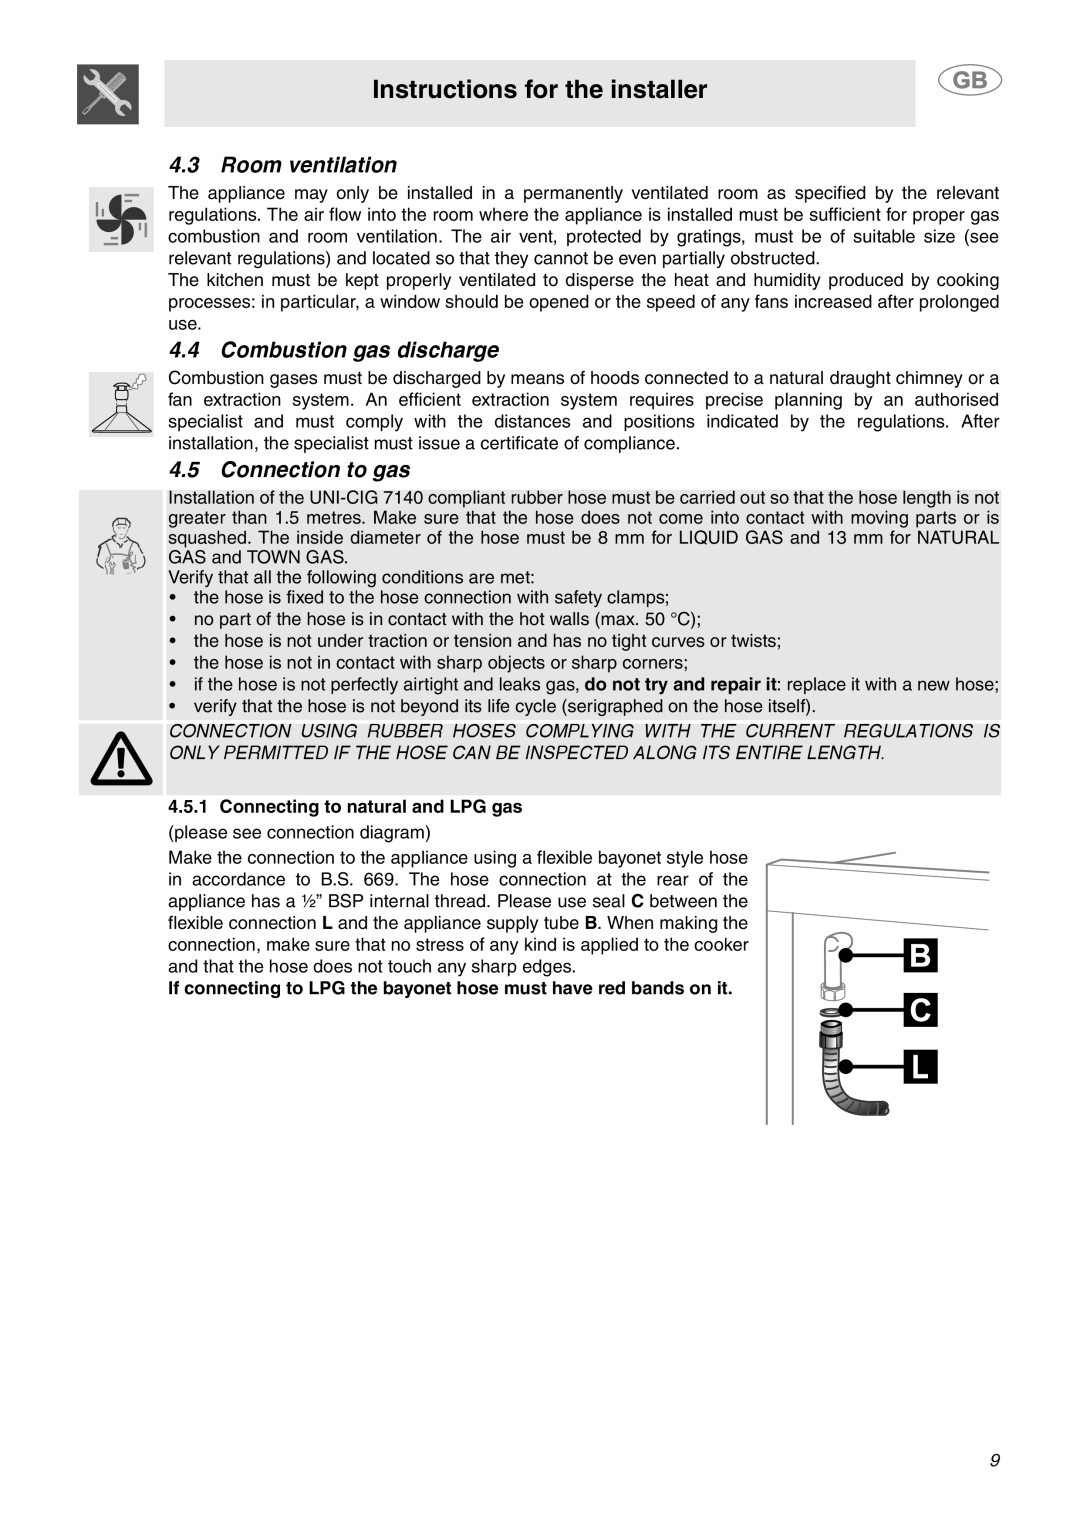 Smeg SY4110 manual Room ventilation, Combustion gas discharge, Connection to gas, Instructions for the installer 